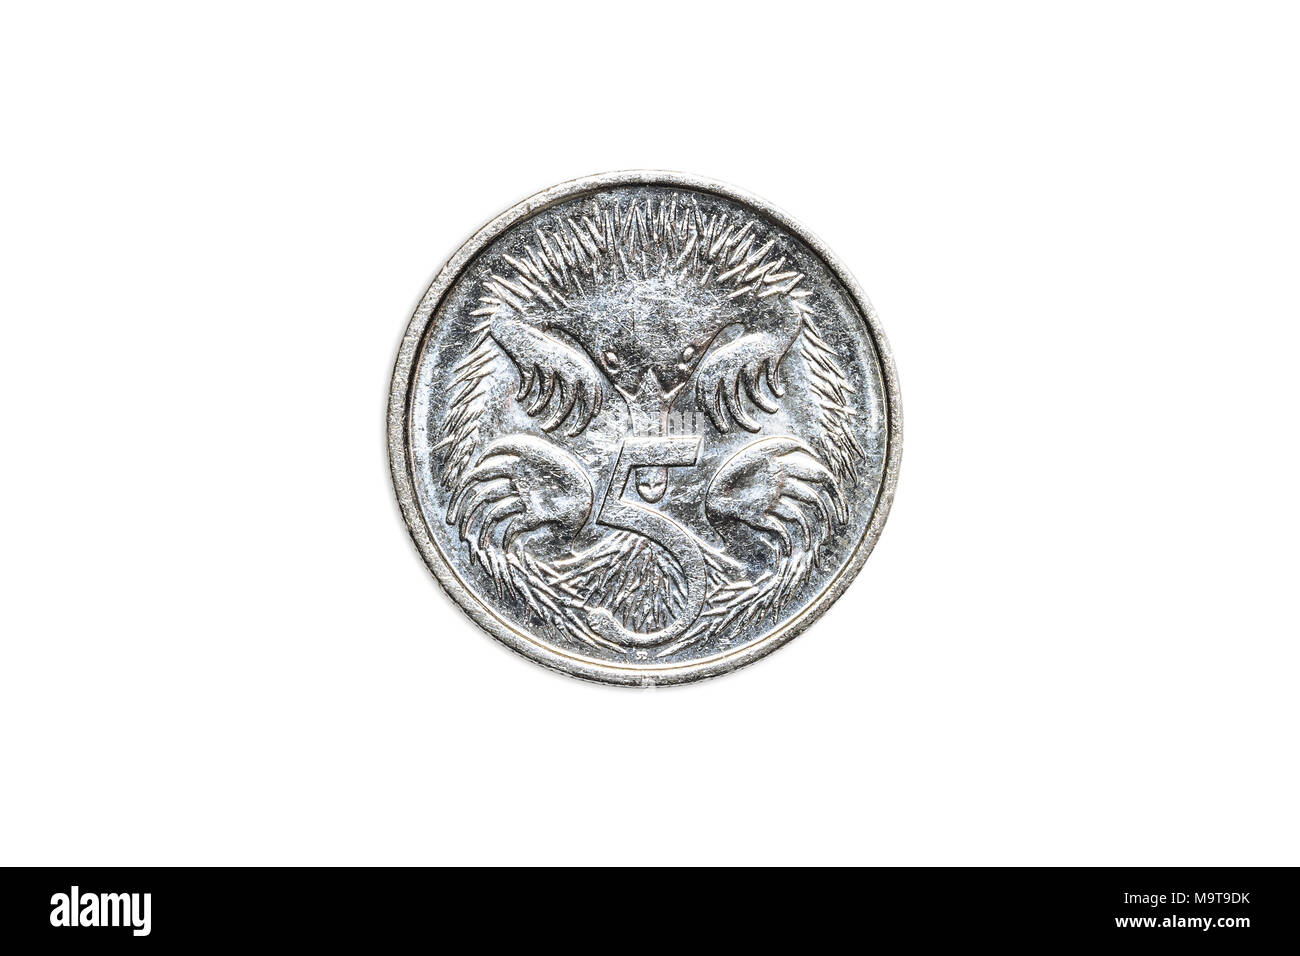 Australian coin of five cents of dollar of Australia, AUD currency, close up of the tail side with echidna animal icon. Isolated on white studio background. Stock Photo